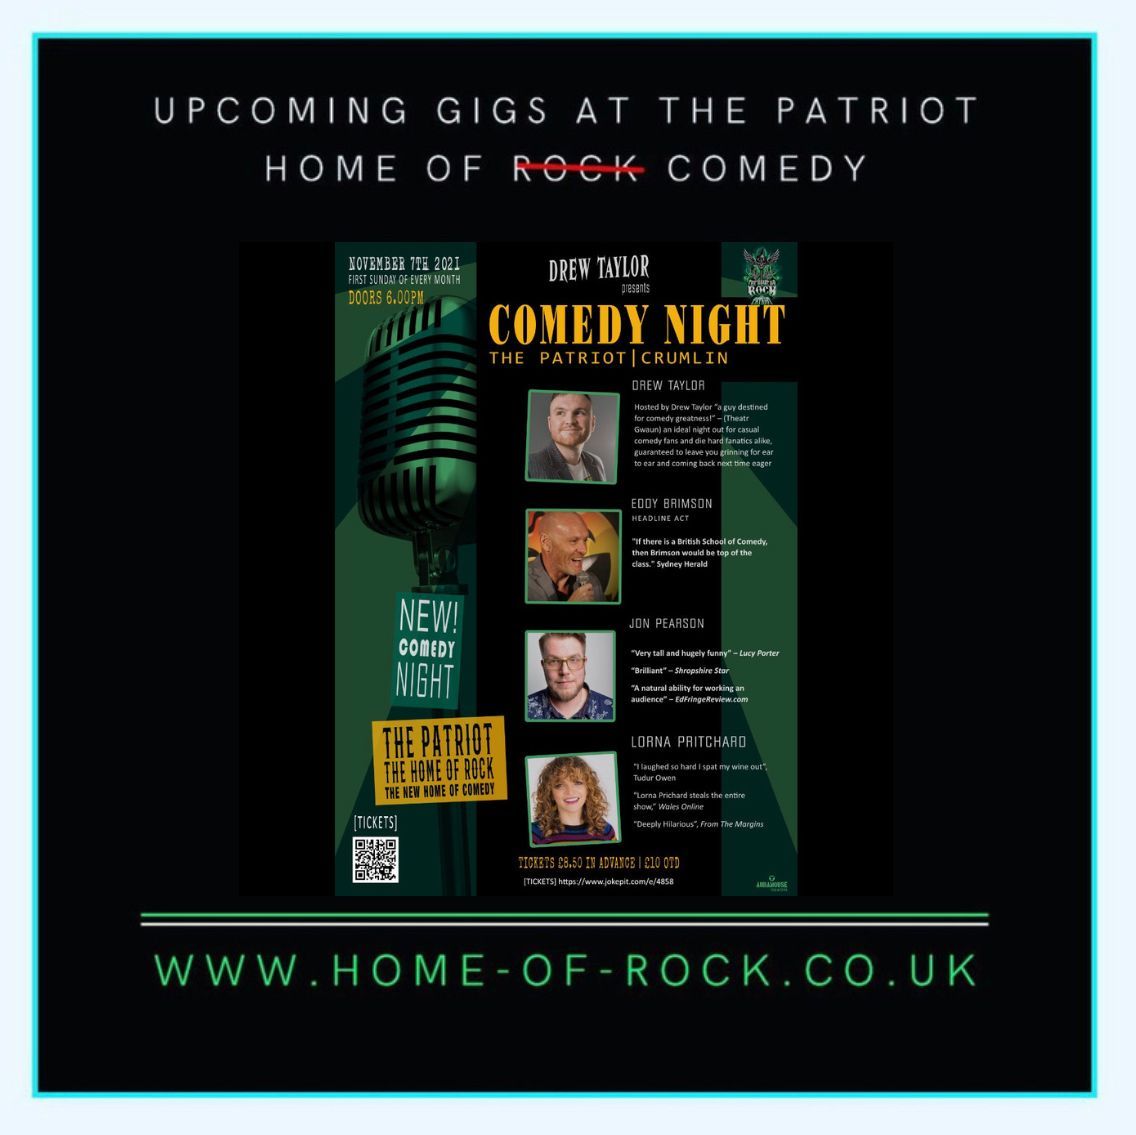 Comedy Night at #PatriotHomeofRock - buff.ly/2WazP0s #Comedy #ComedyNight #LiveComedy #Crumlin #SouthWales #Wales